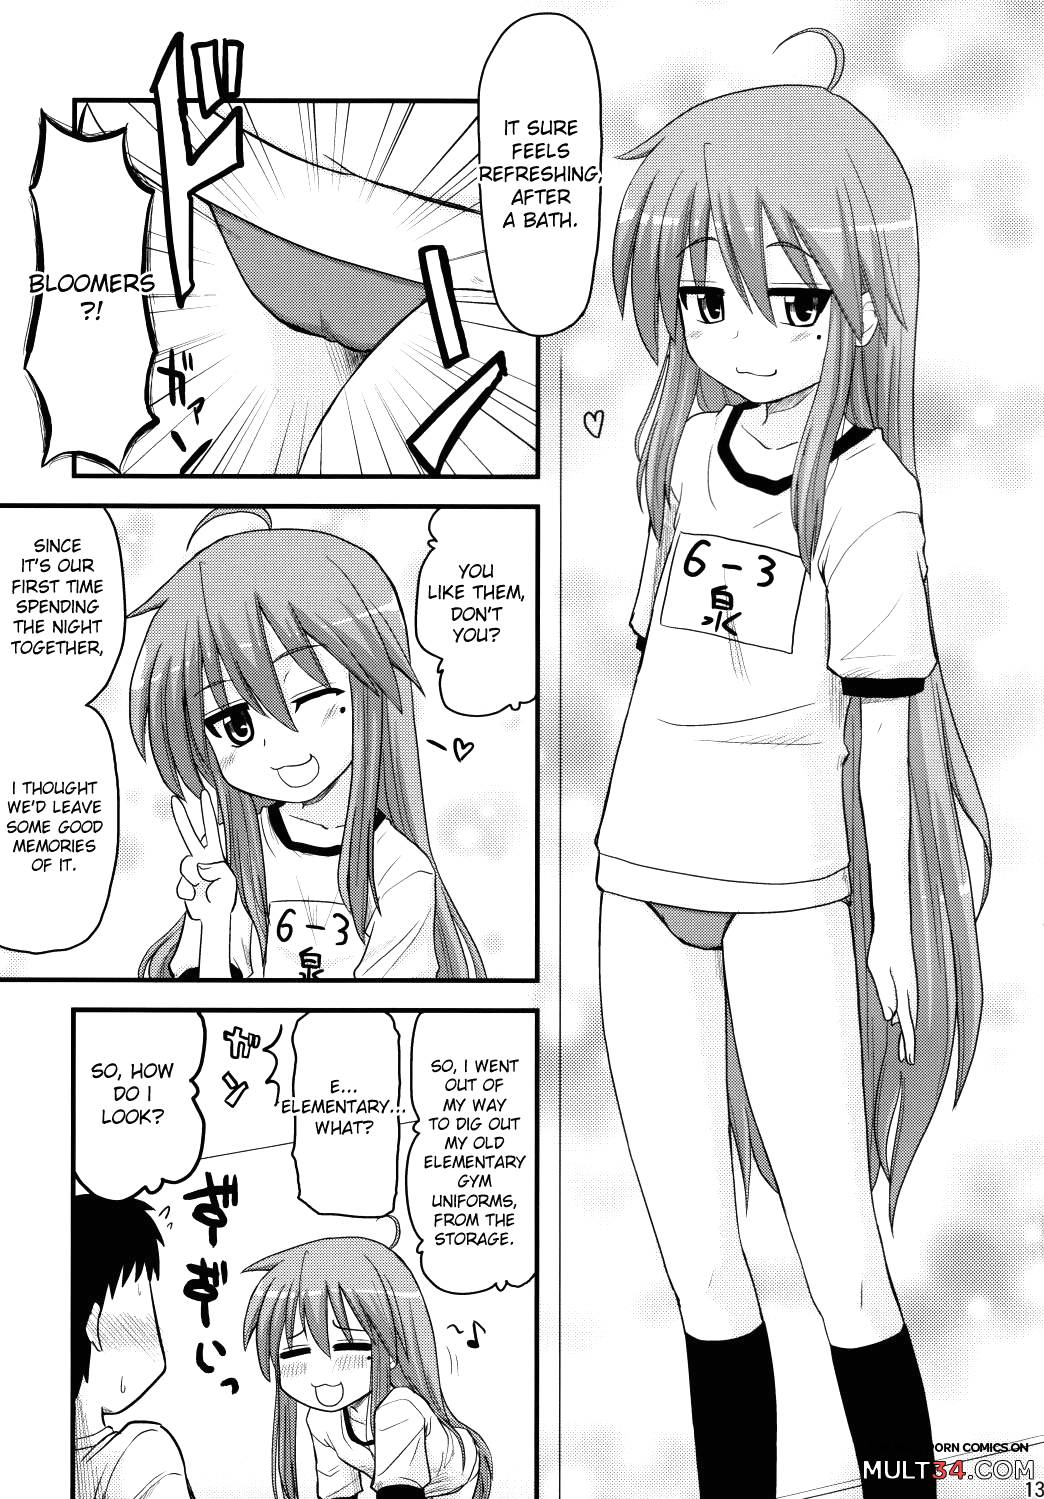 Konata and Oh-zu 4 people each and every one + 1 page 9